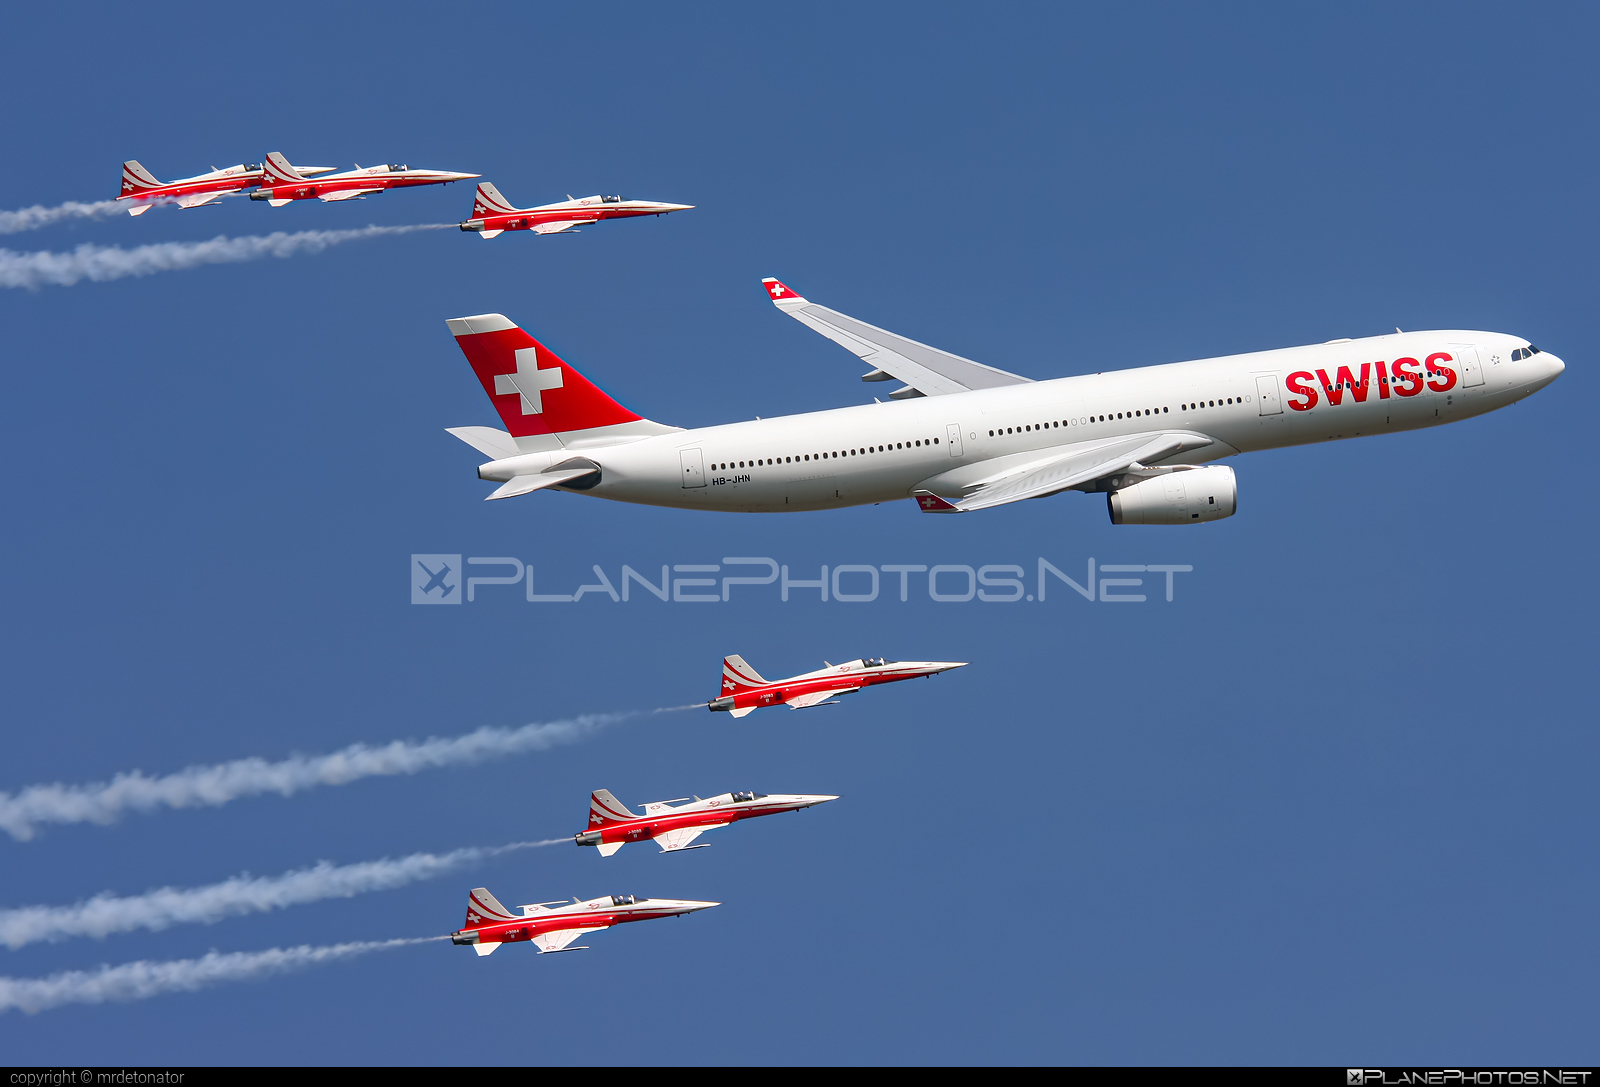 Airbus A330-343 - HB-JHN operated by Swiss International Air Lines #a330 #a330family #airbus #airbus330 #swiss #swissairlines